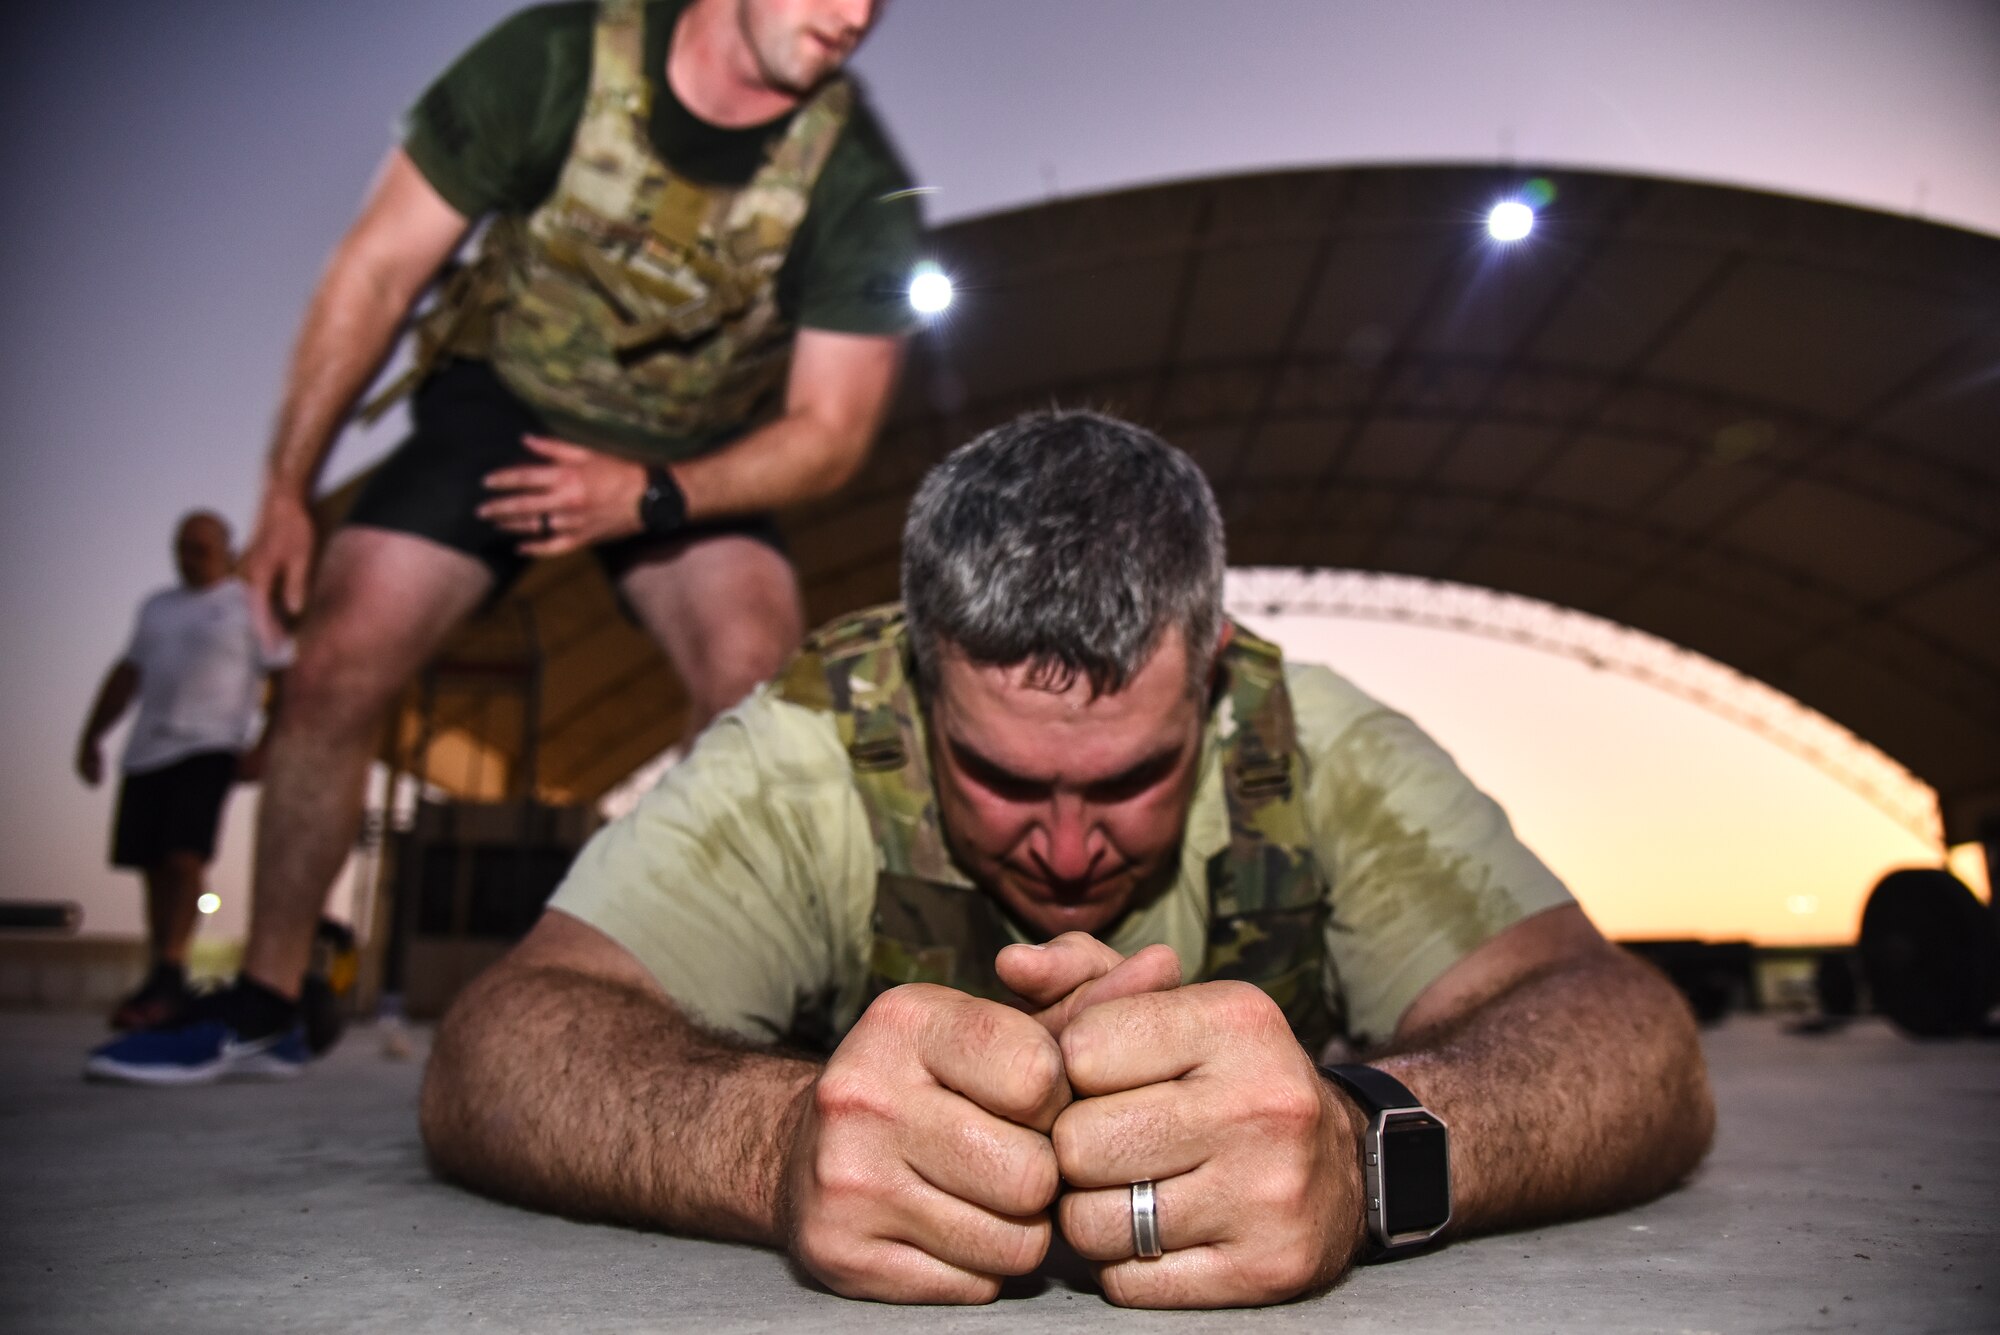 A U.S. Air Force Airman does burpees over his partner during the EOD 134 Memorial Workout at Al Dhafra Air Base, United Arab Emirates, Nov. 30, 2018. 380th Air Expeditionary Wing Airmen, along with coalition partners, participated in the workout to honor the 134 EOD technicians from the U.S. Air Force, Army, Navy and Marine Corps that have been killed since Sept. 11, 2001. (U.S. Air Force photo by Senior Airman Mya M. Crosby)